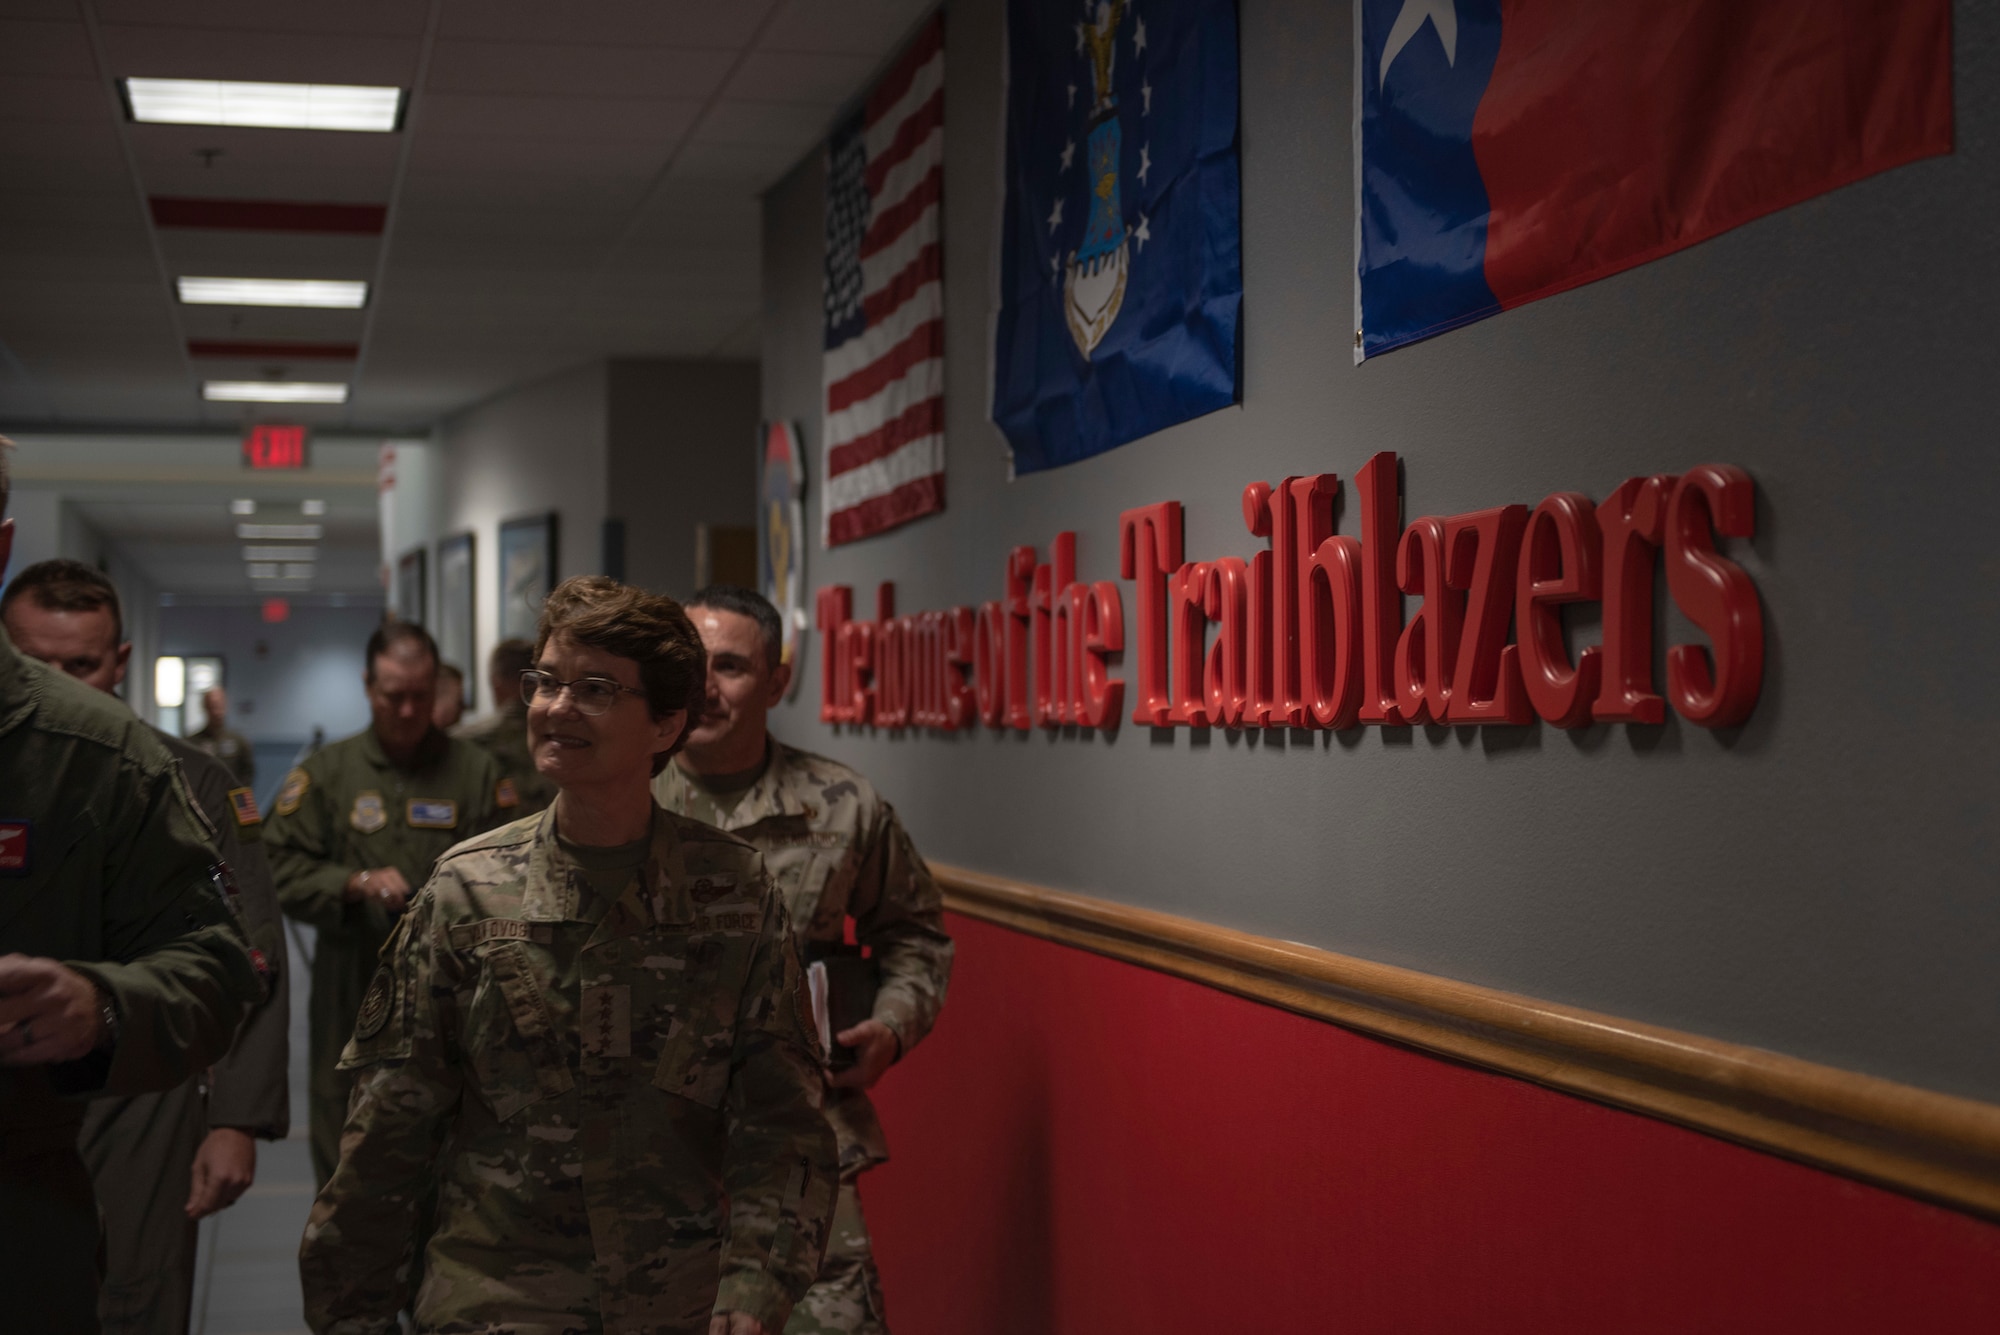 U.S. Air Force Gen. Jacqueline Van Ovost, Air Mobility Command commander, walks through the 317th Airlift Wing operations and maintenance building at Dyess Air Force Base, Texas, July 8, 2021. During the visit, Van Ovost was briefed on the accomplishments of the 317th AW at home station and deployed. (U.S. Air Force photo by Senior Airman Colin Hollowell)